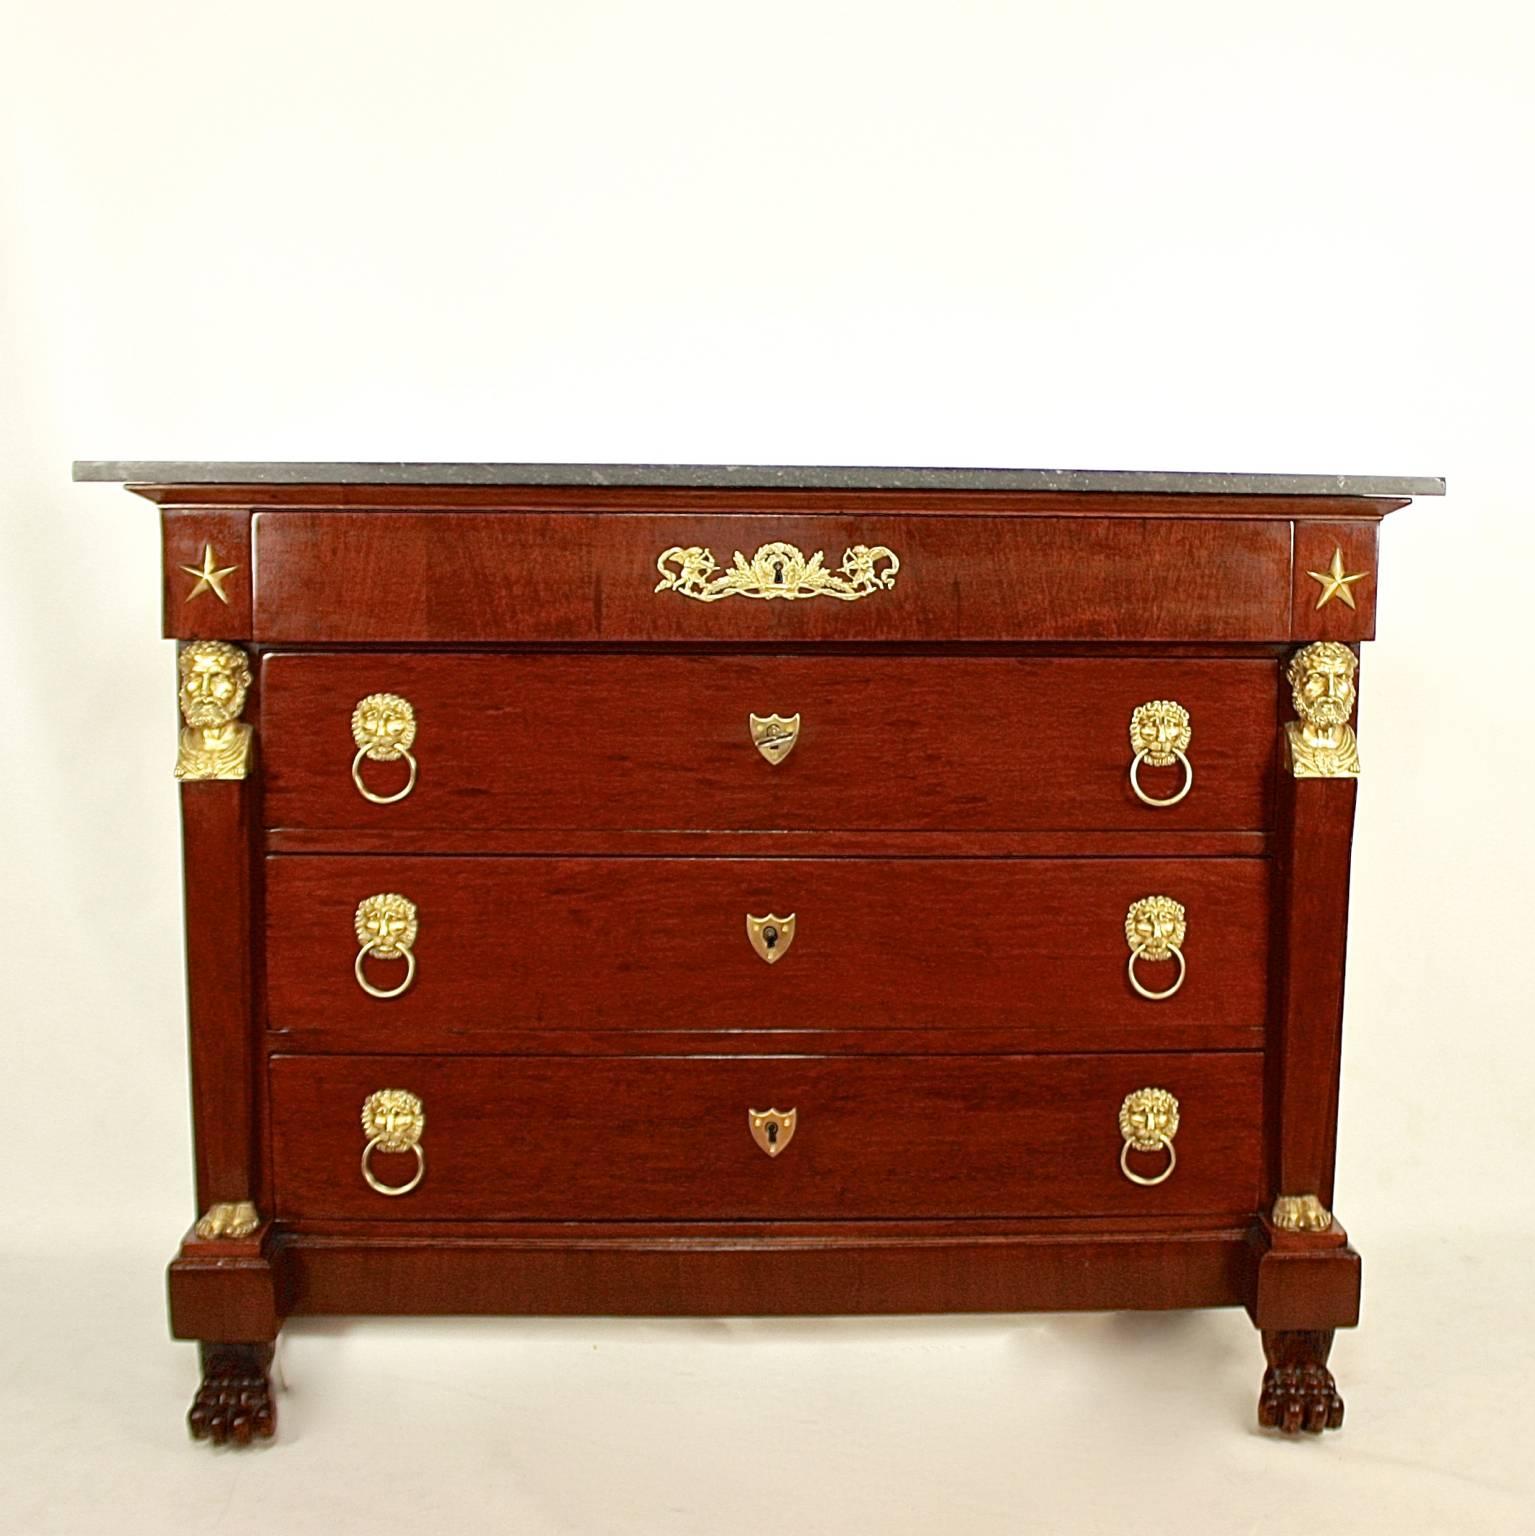 A fine Empire acajou mouchete mahogany commode in the manner of Bernard Molitor (1755-1833). A rectangular oak corpus veneered with acajou mouchete mahogany, with a grey marble top above a projecting frieze drawer adorned with five-pointed stars,